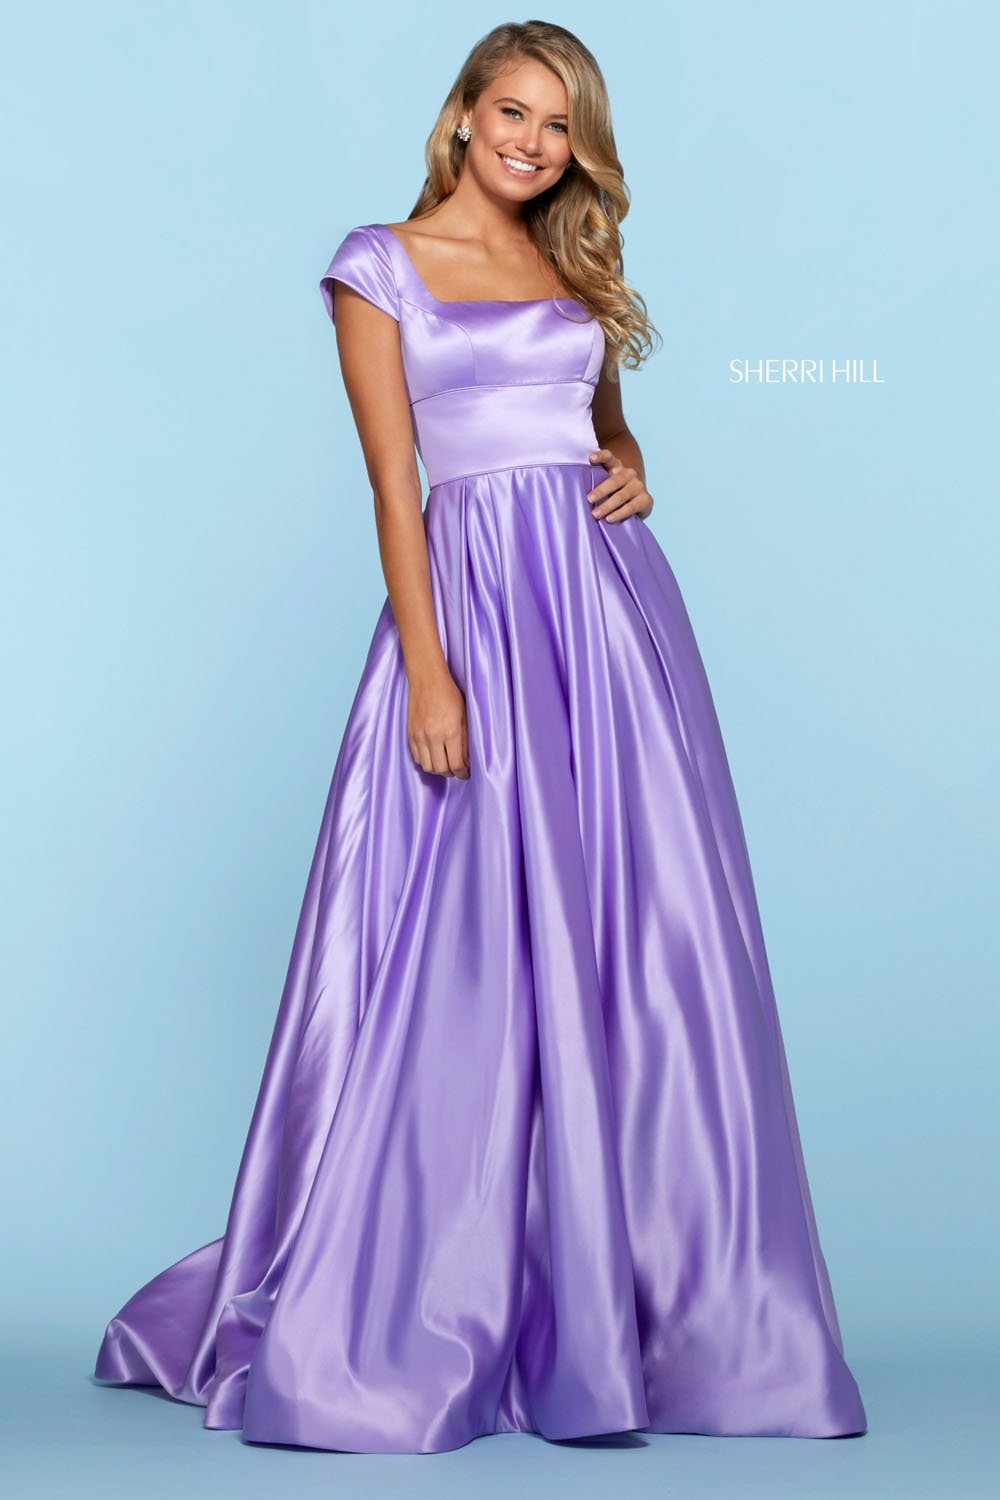 Sherri Hill 53314 dress images in these colors: Candy Pink, Mocha, Yellow, Ivory, Blush, Light Blue, Emerald, Lilac, Red.